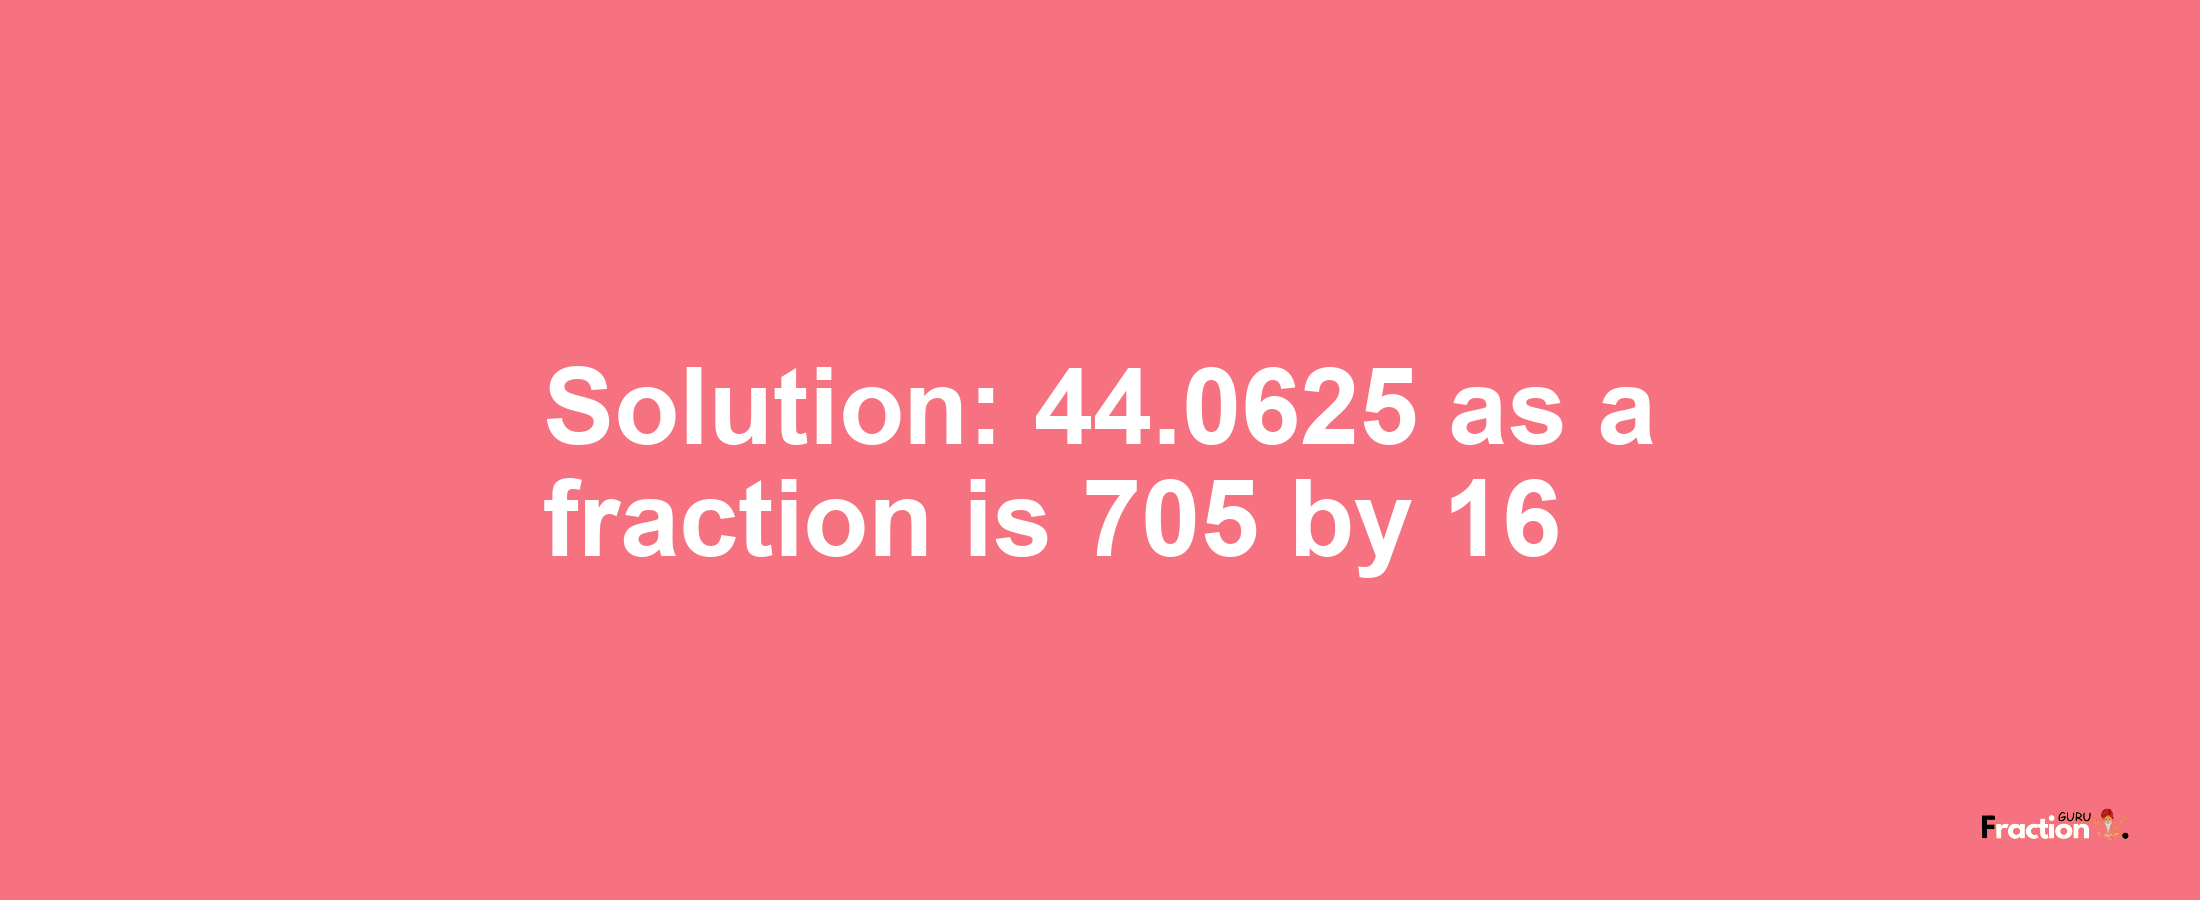 Solution:44.0625 as a fraction is 705/16